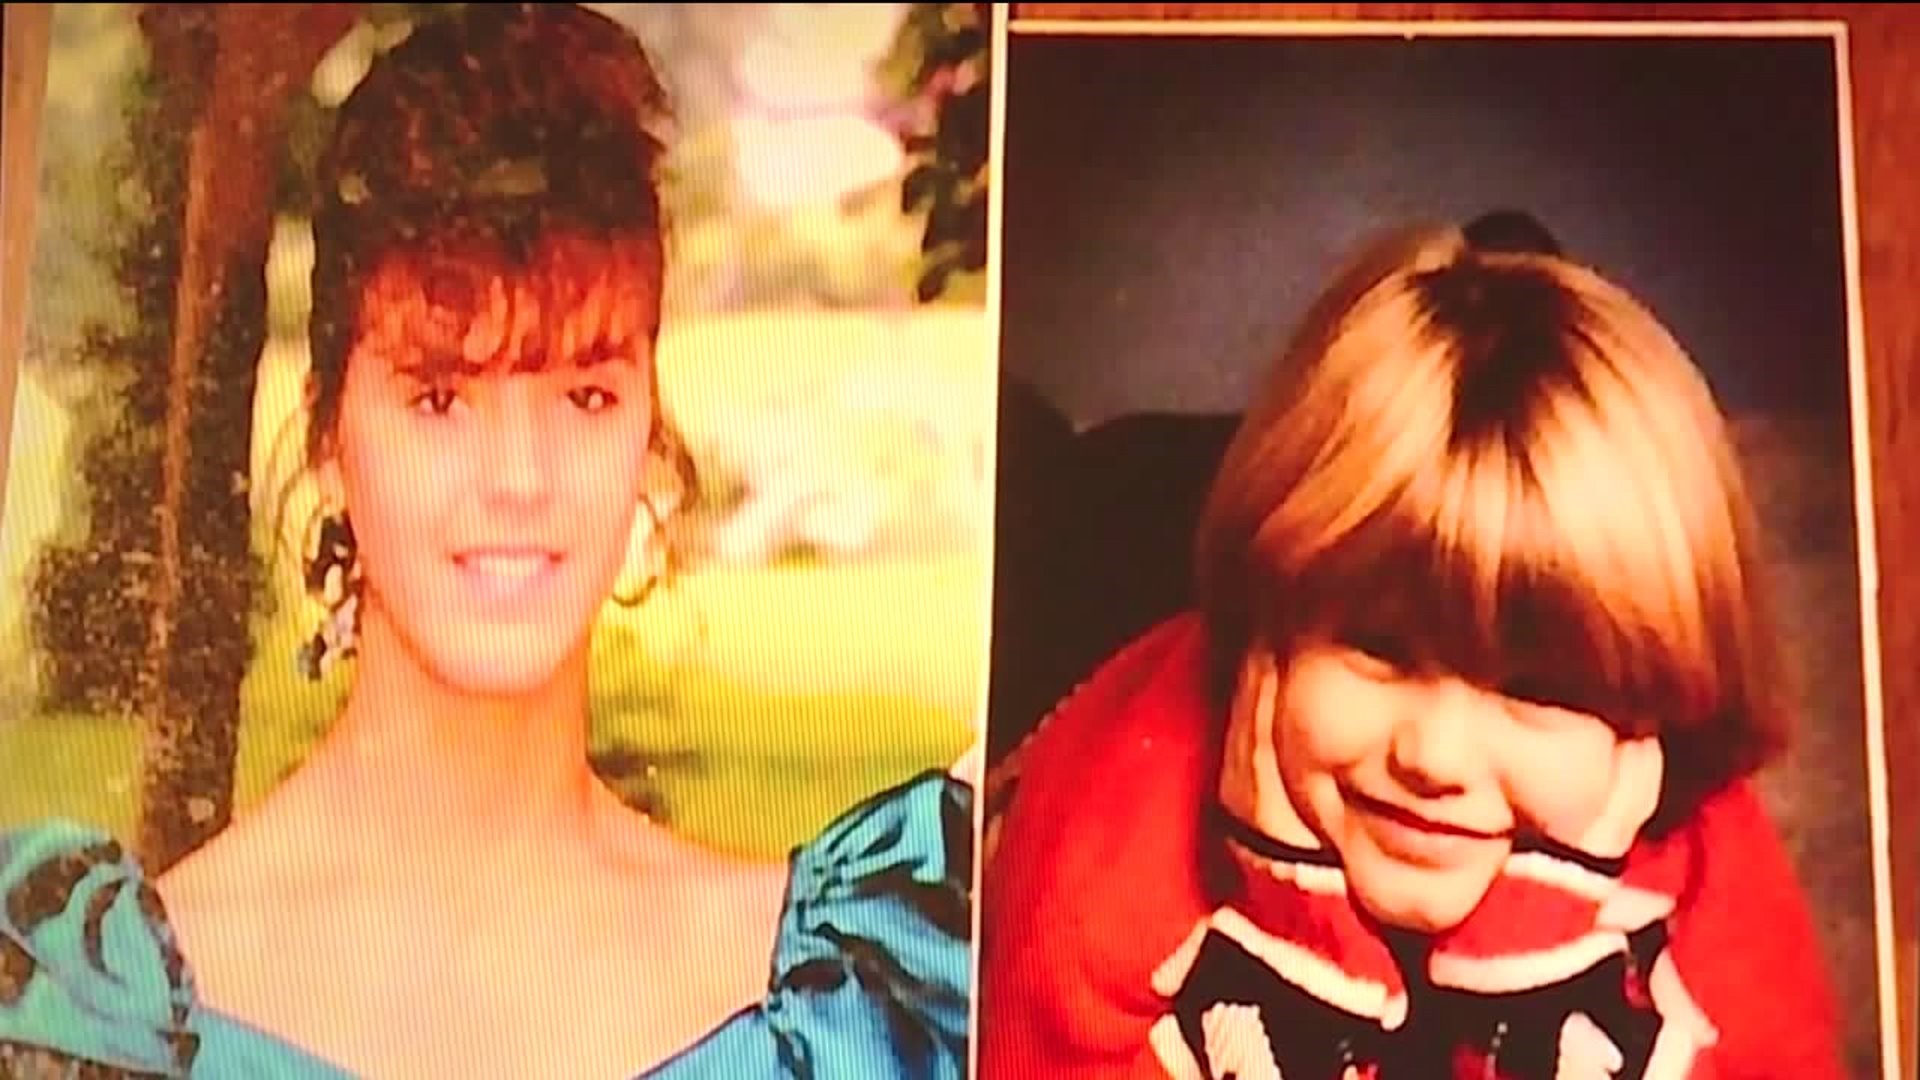 Murder Victims Remembered on 25th Anniversary of Their Deaths as Case Remains Unsolved